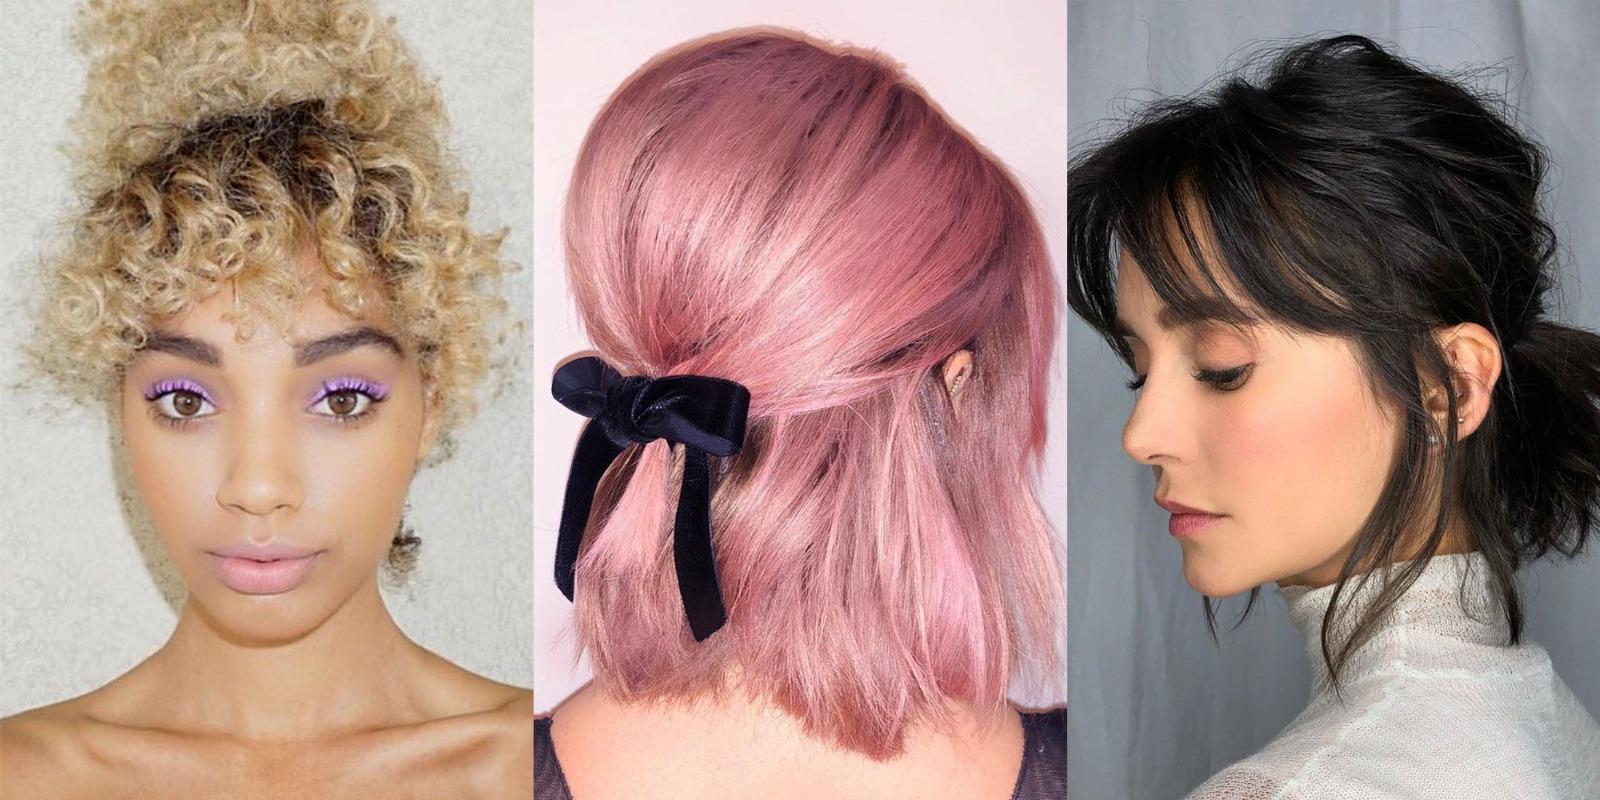 Such hairstyles can be made in short hair, you can also try